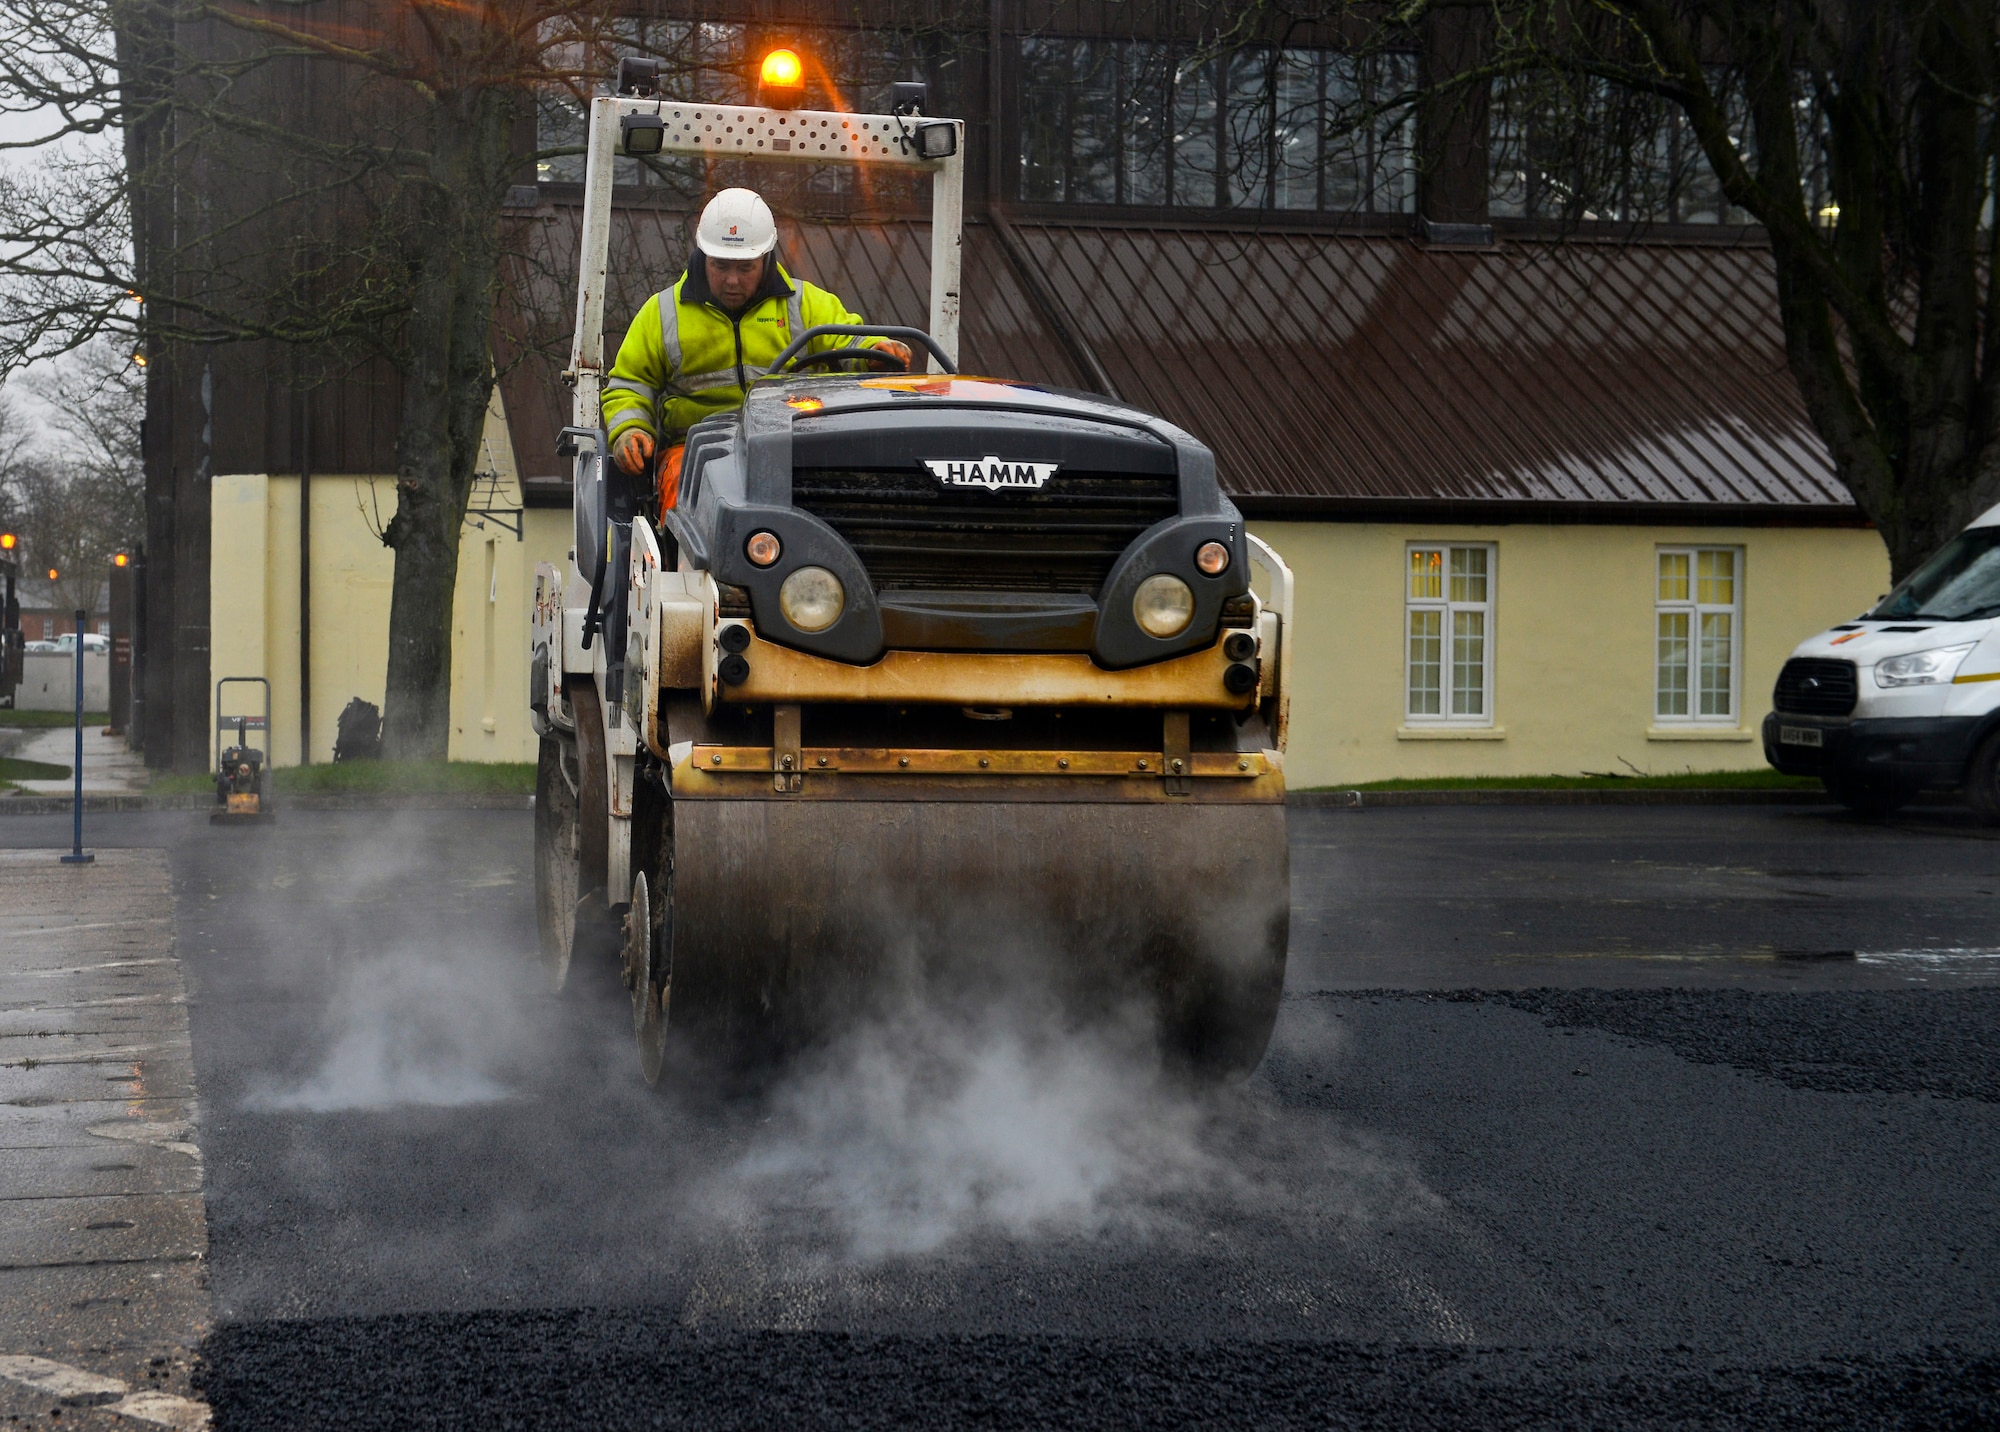 A contracted construction worker drives a steam roller over freshly laid asphalt in the 100th Logistics Readiness Squadron Vehicle Operations yard Jan. 22, 2016, on RAF Mildenhall, England. Construction workers used steam rollers to compact and even out the surface of the parking lot. (U.S. Air Force photo by Staff Sgt. Micaiah Anthony/Released) 